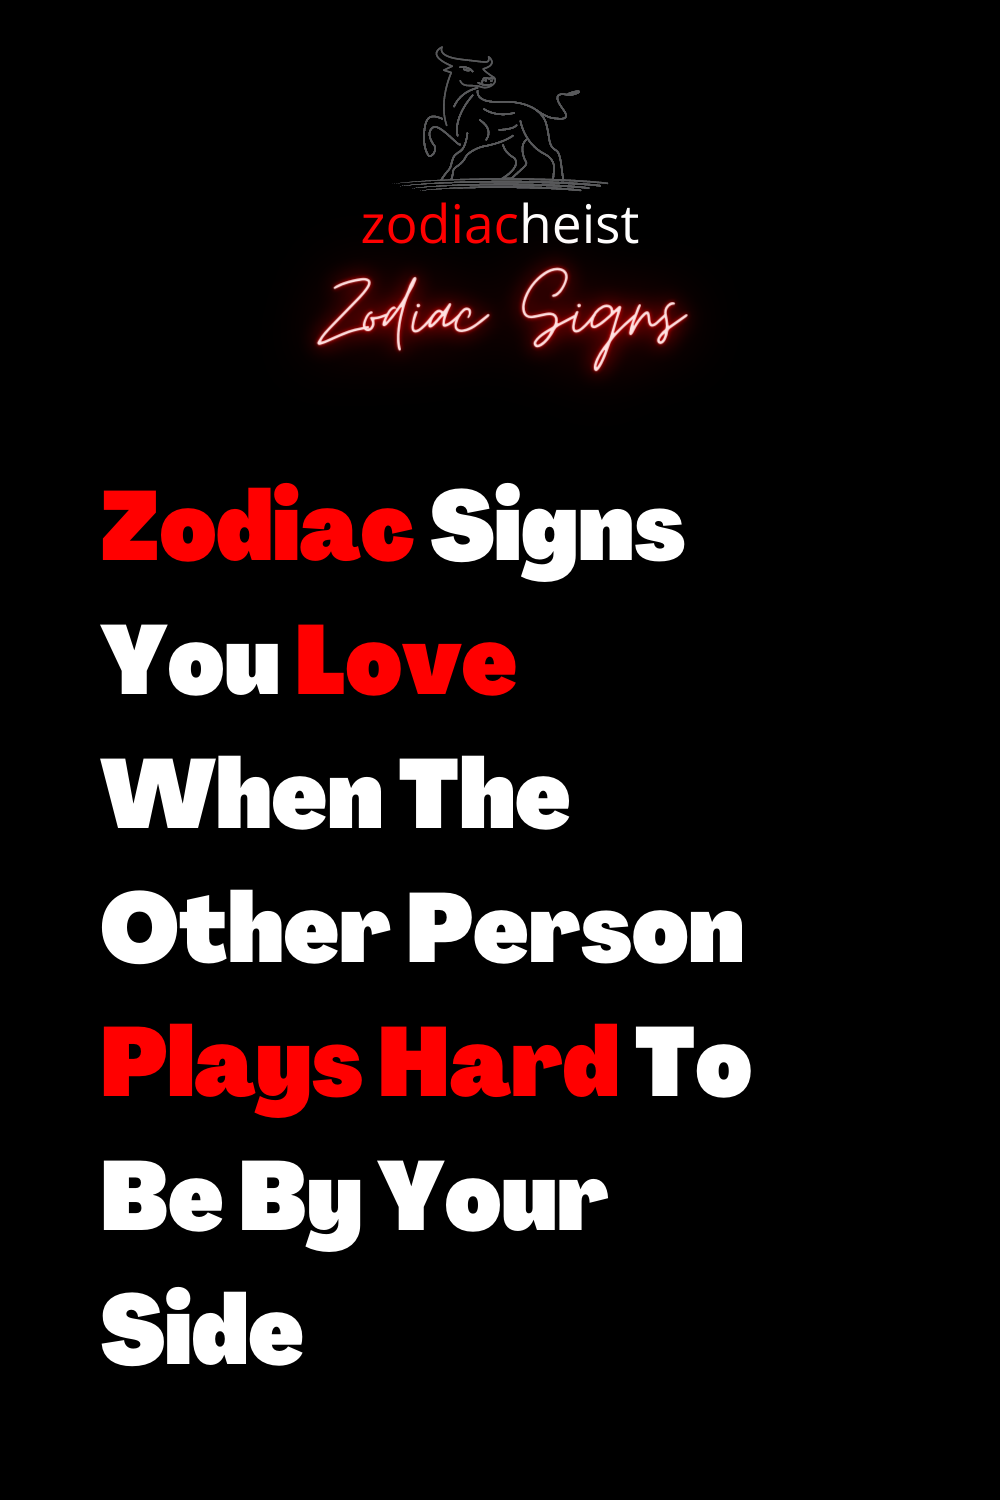 Zodiac Signs You Love When The Other Person Plays Hard To Be By Your ...